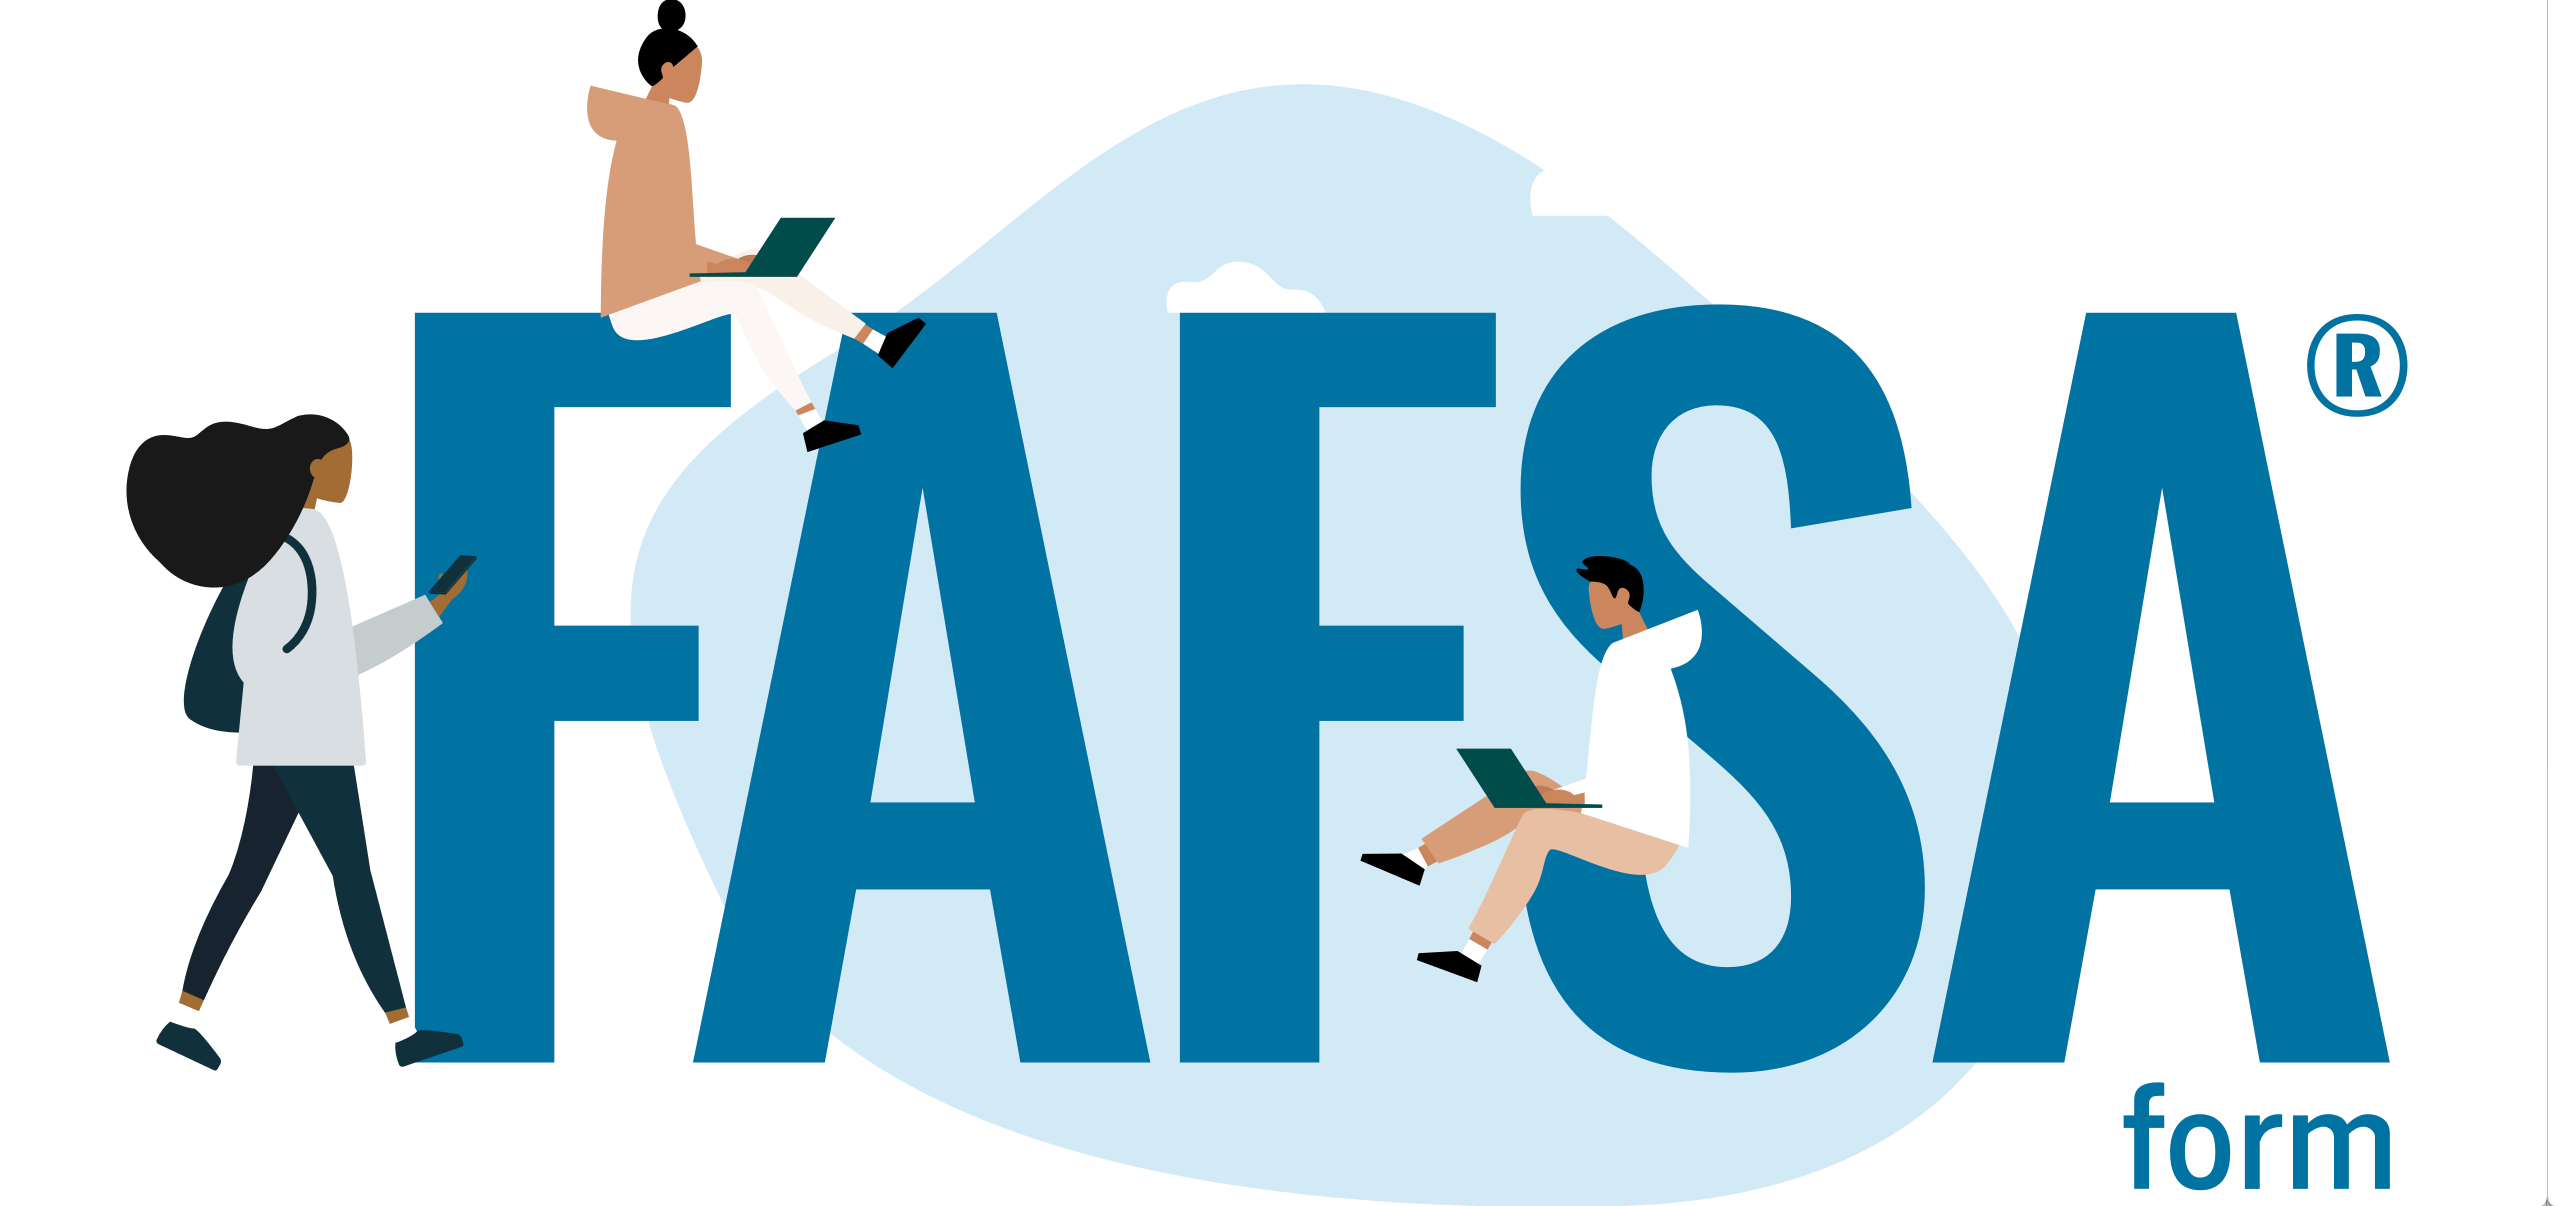 FAFSA image from the DOE